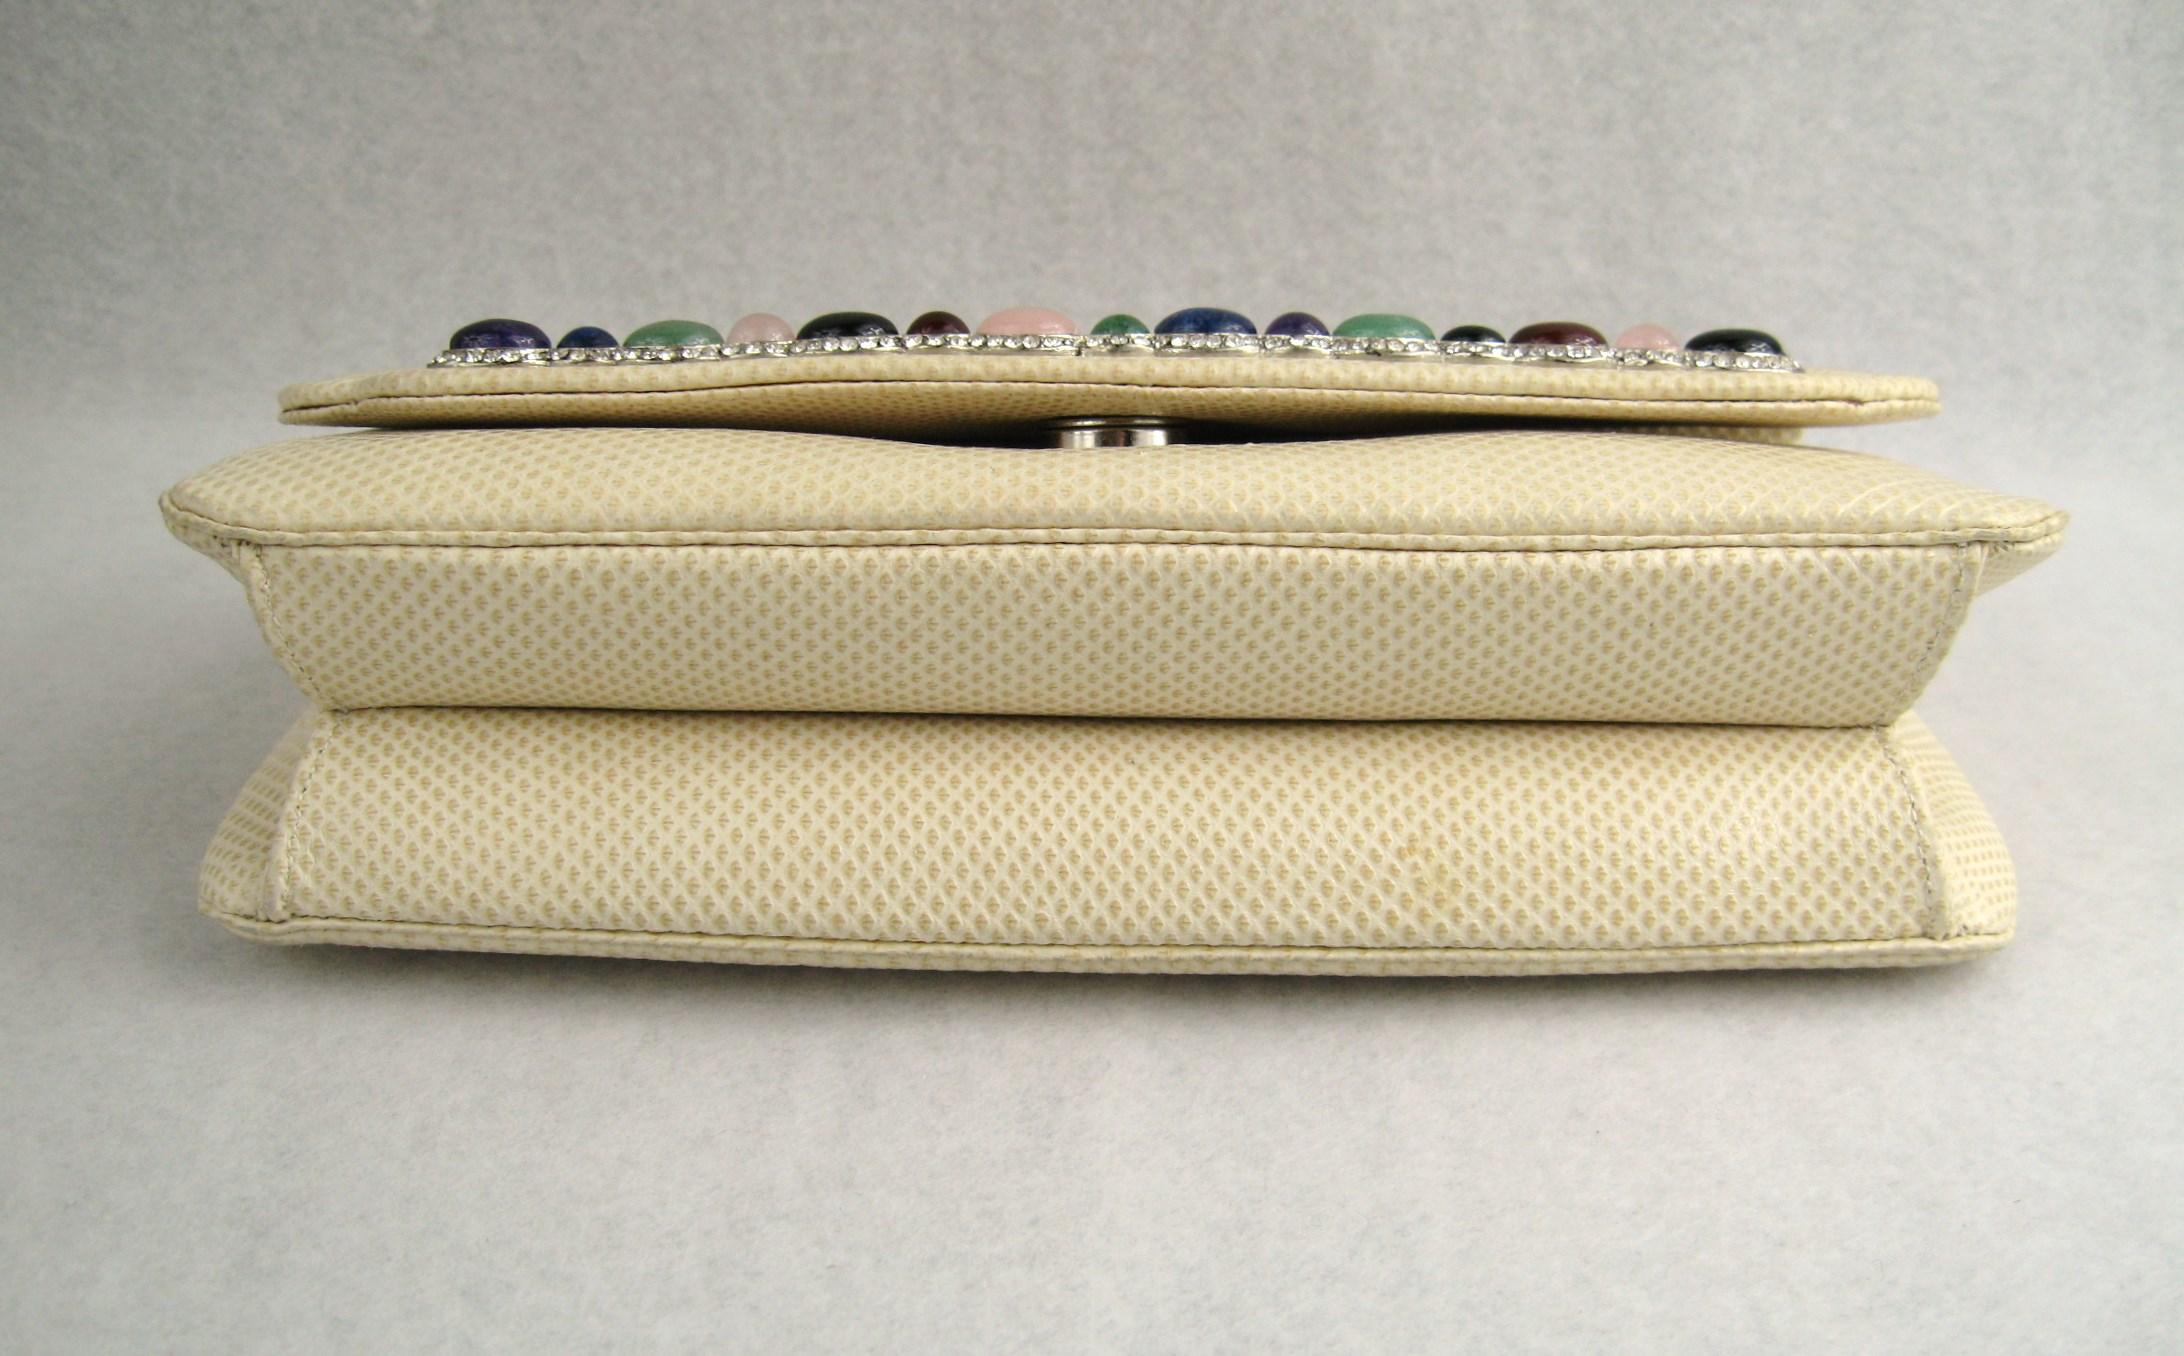 Judith Leiber Lizard Leather Evening Bag Handbag Clutch - Semi - Precious Stones In Excellent Condition For Sale In Wallkill, NY